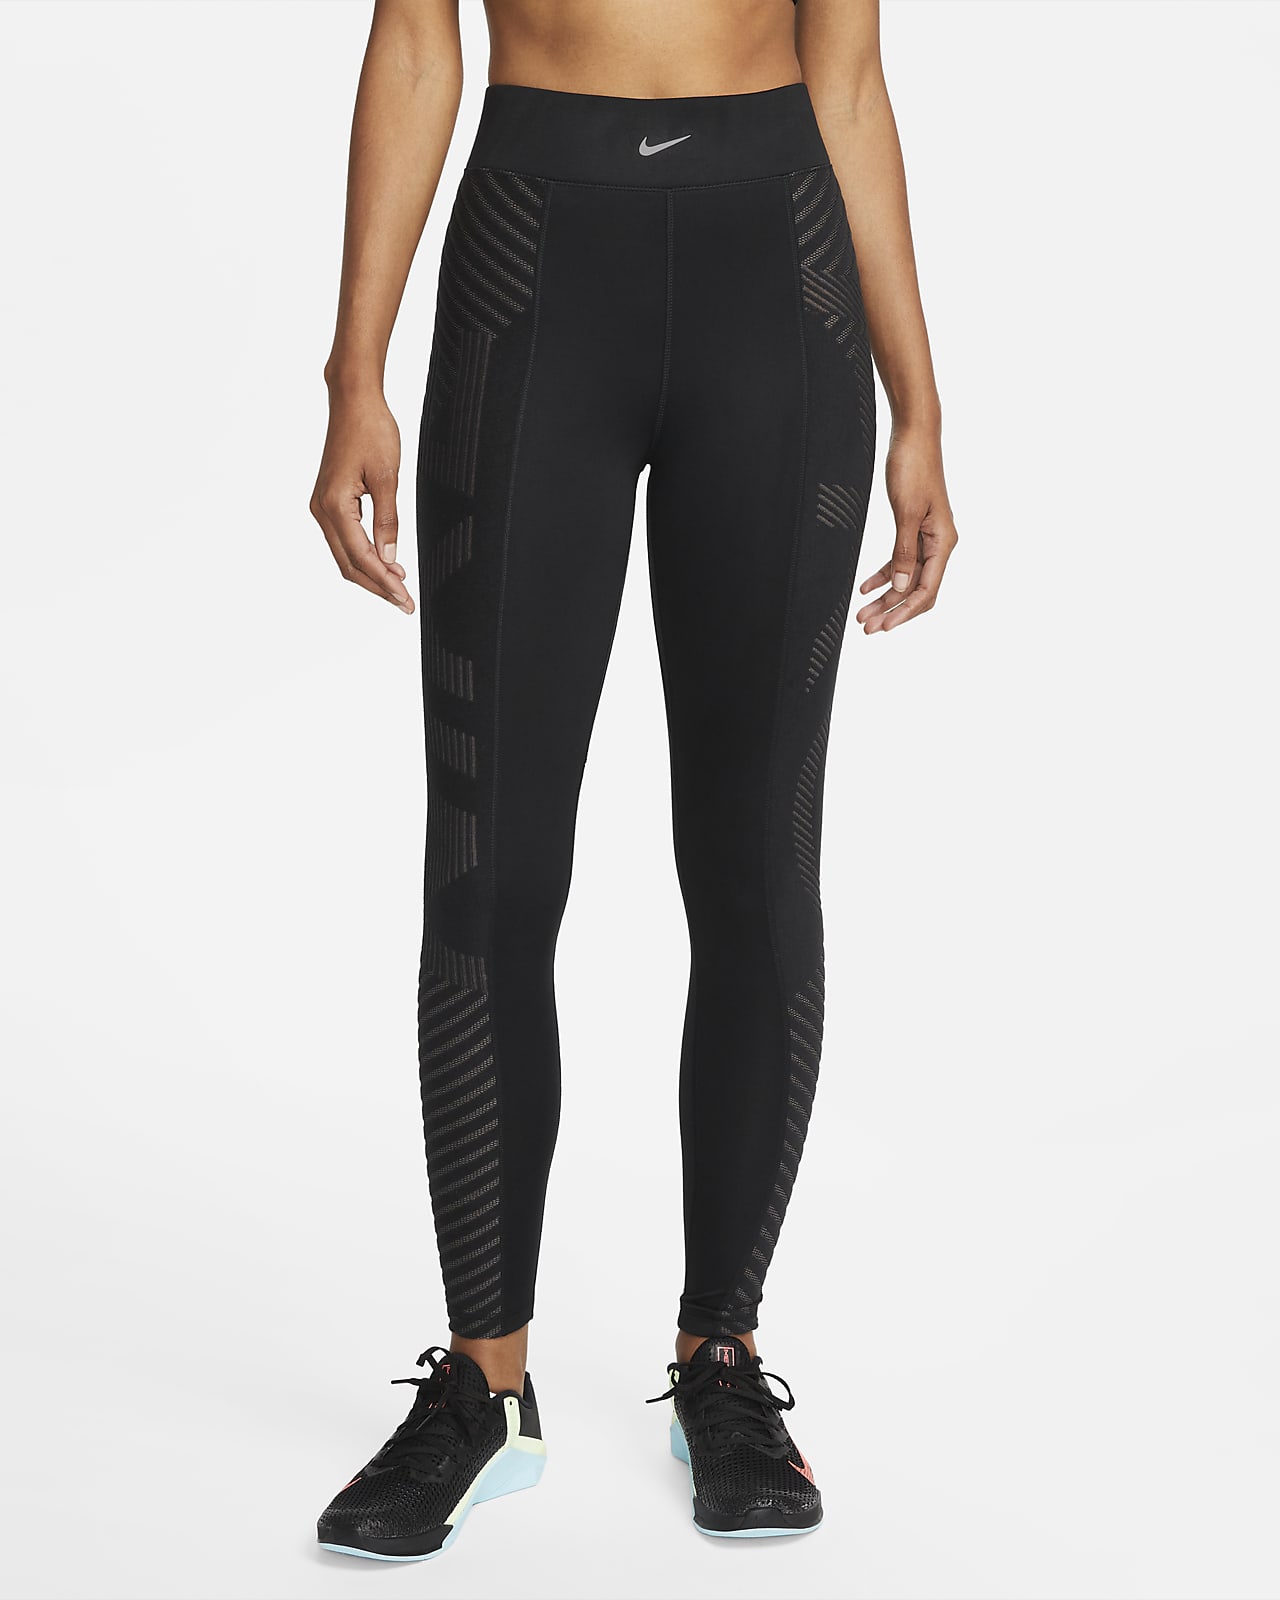 Pro Therma-FIT ADV Women's High-Waisted Leggings.